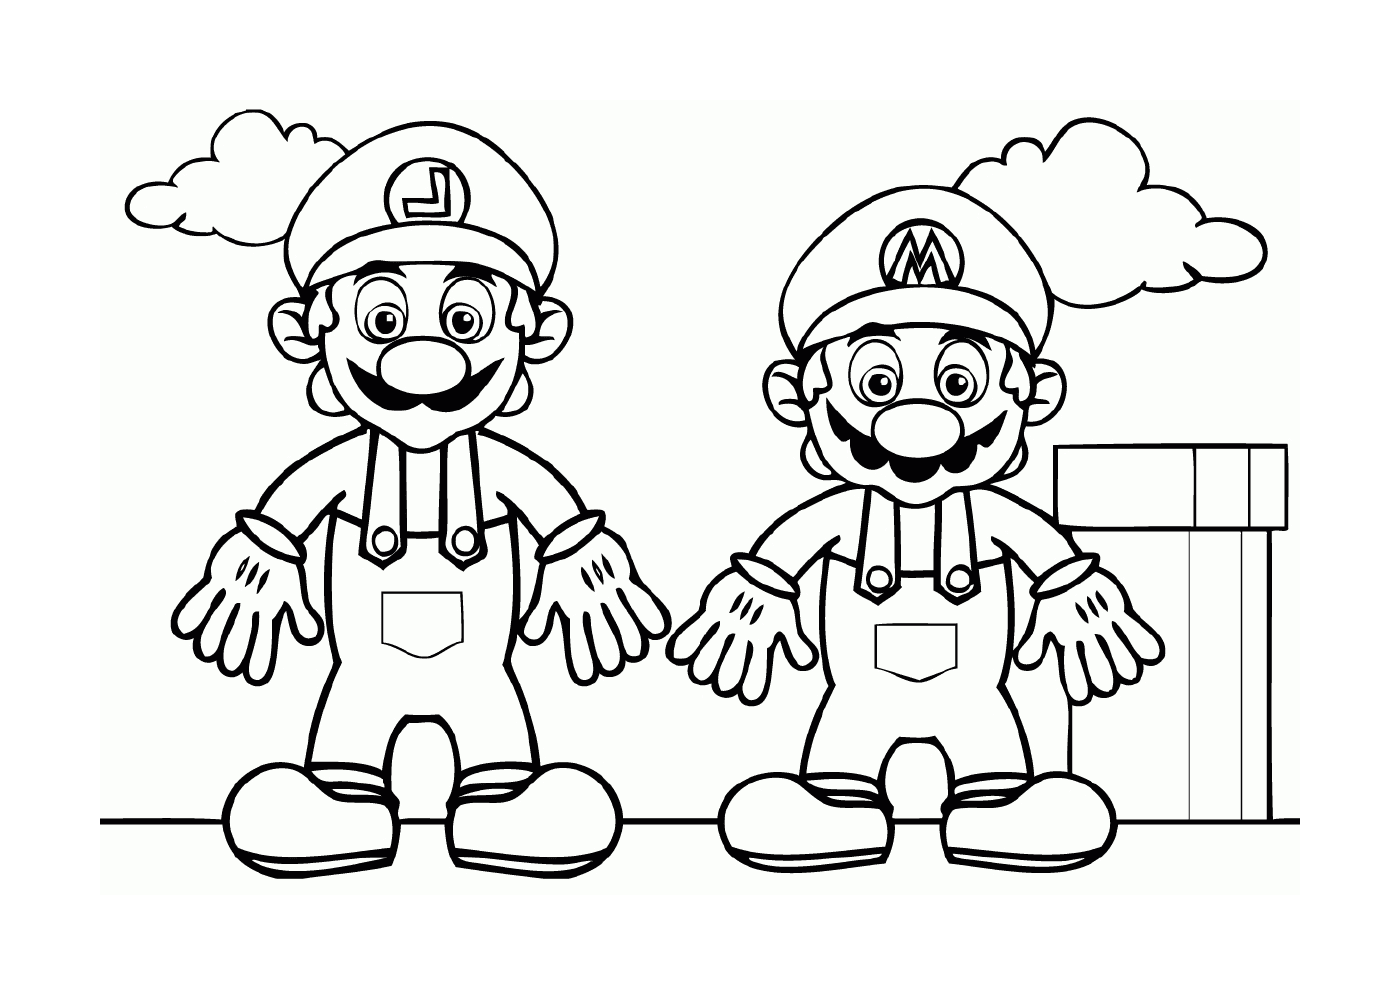  Mario and Luigi, two famous brothers 